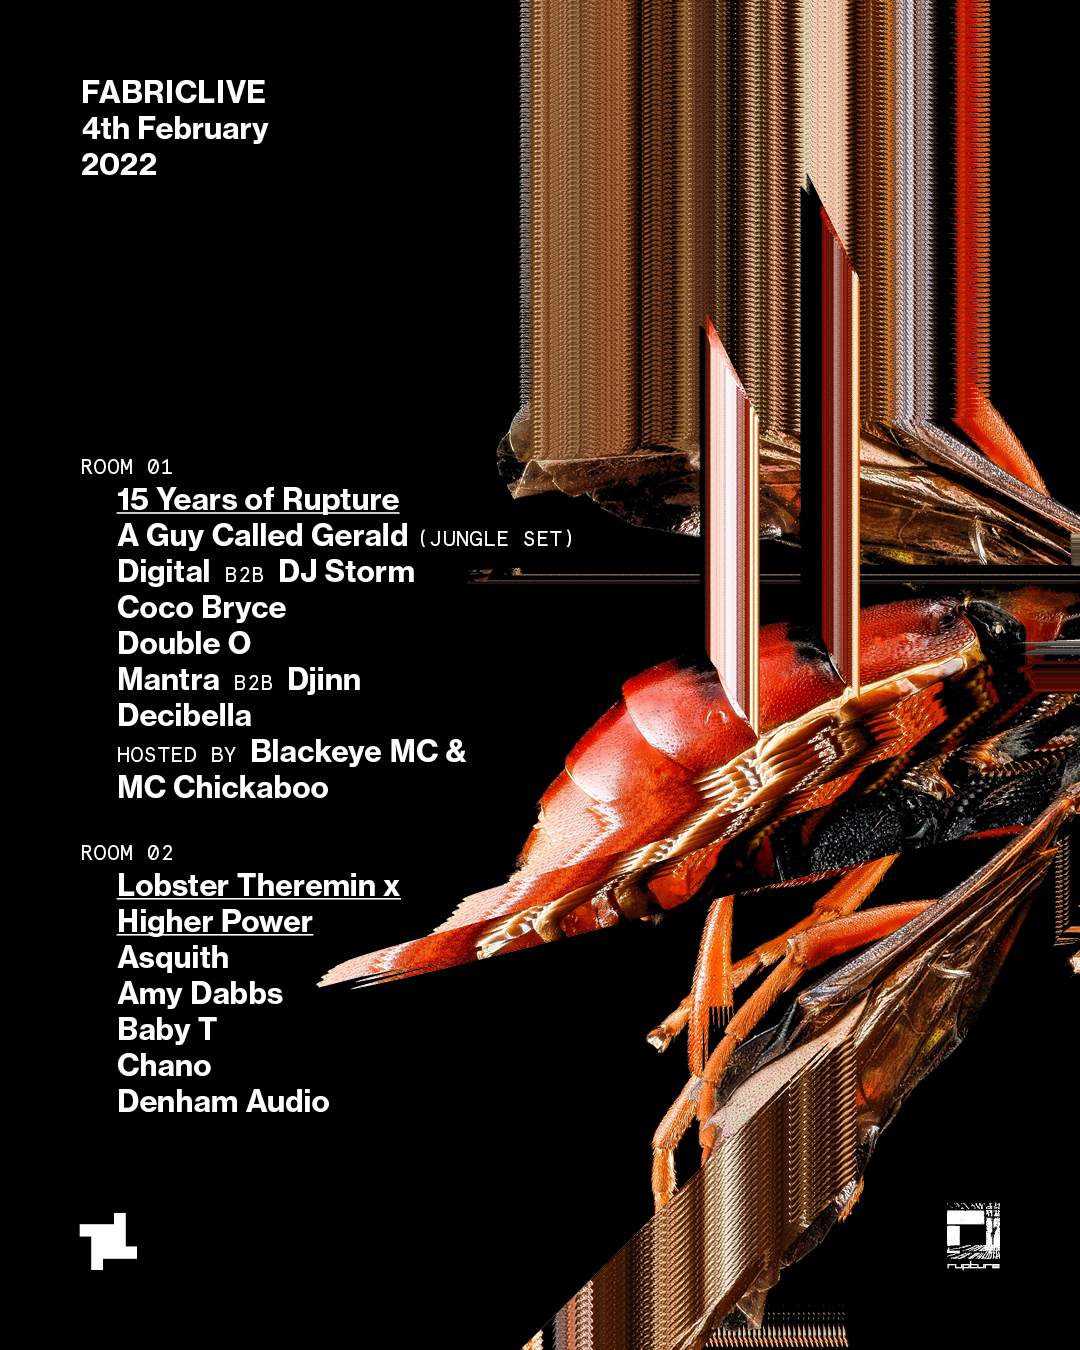 FABRICLIVE: 15 Years of Rupture x Lobster Theremin x Higher Power - A Guy Called Gerald - Página frontal